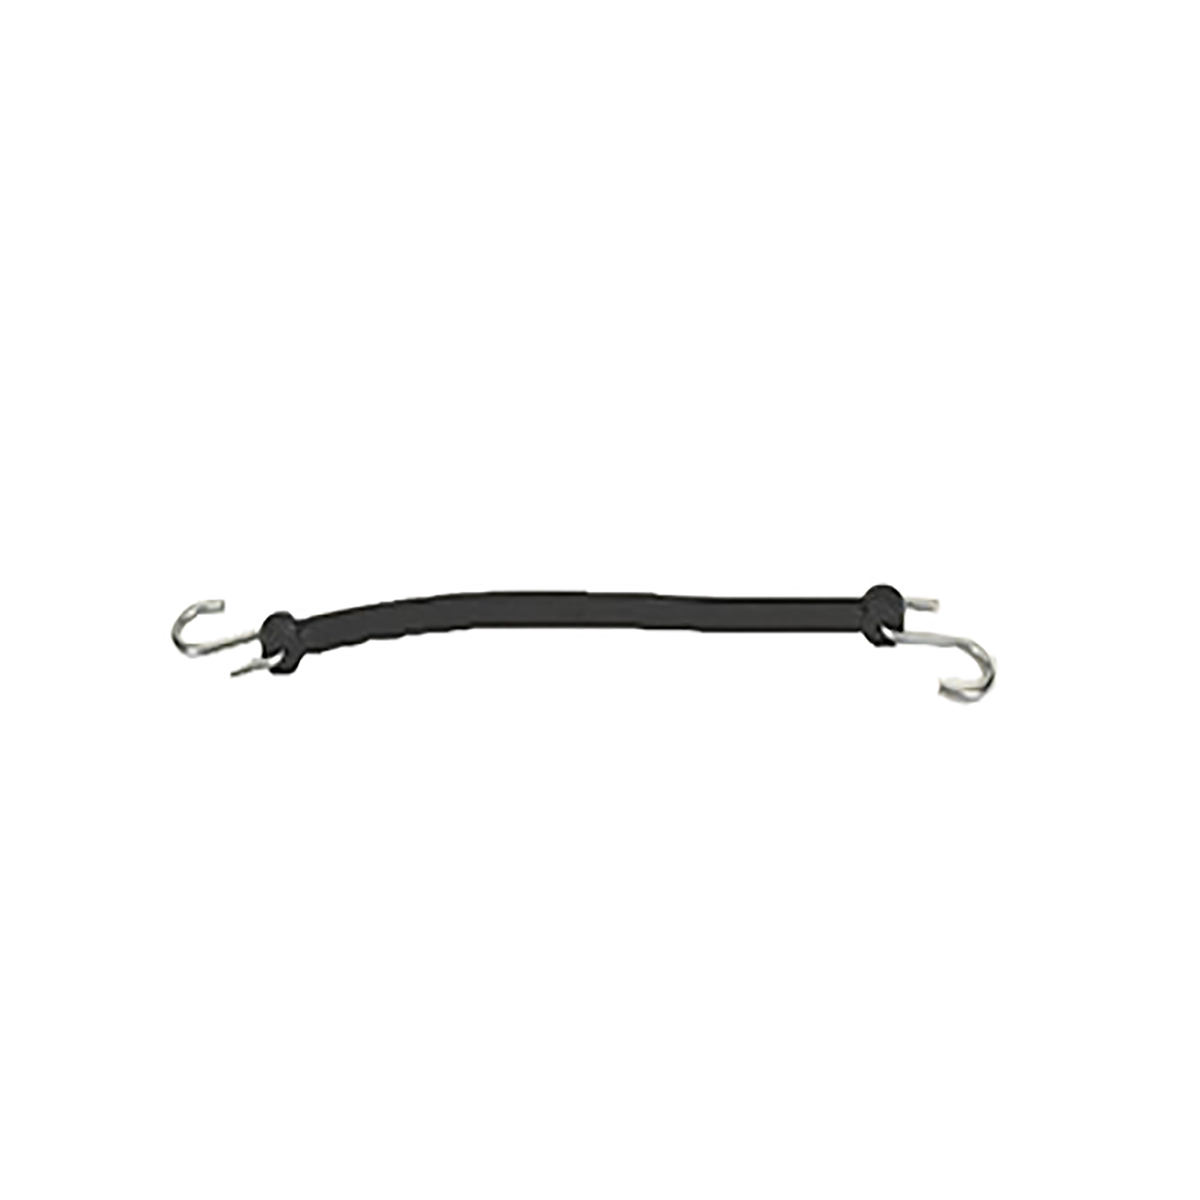 Rubber Tie-down Strap with S-Hooks, 19